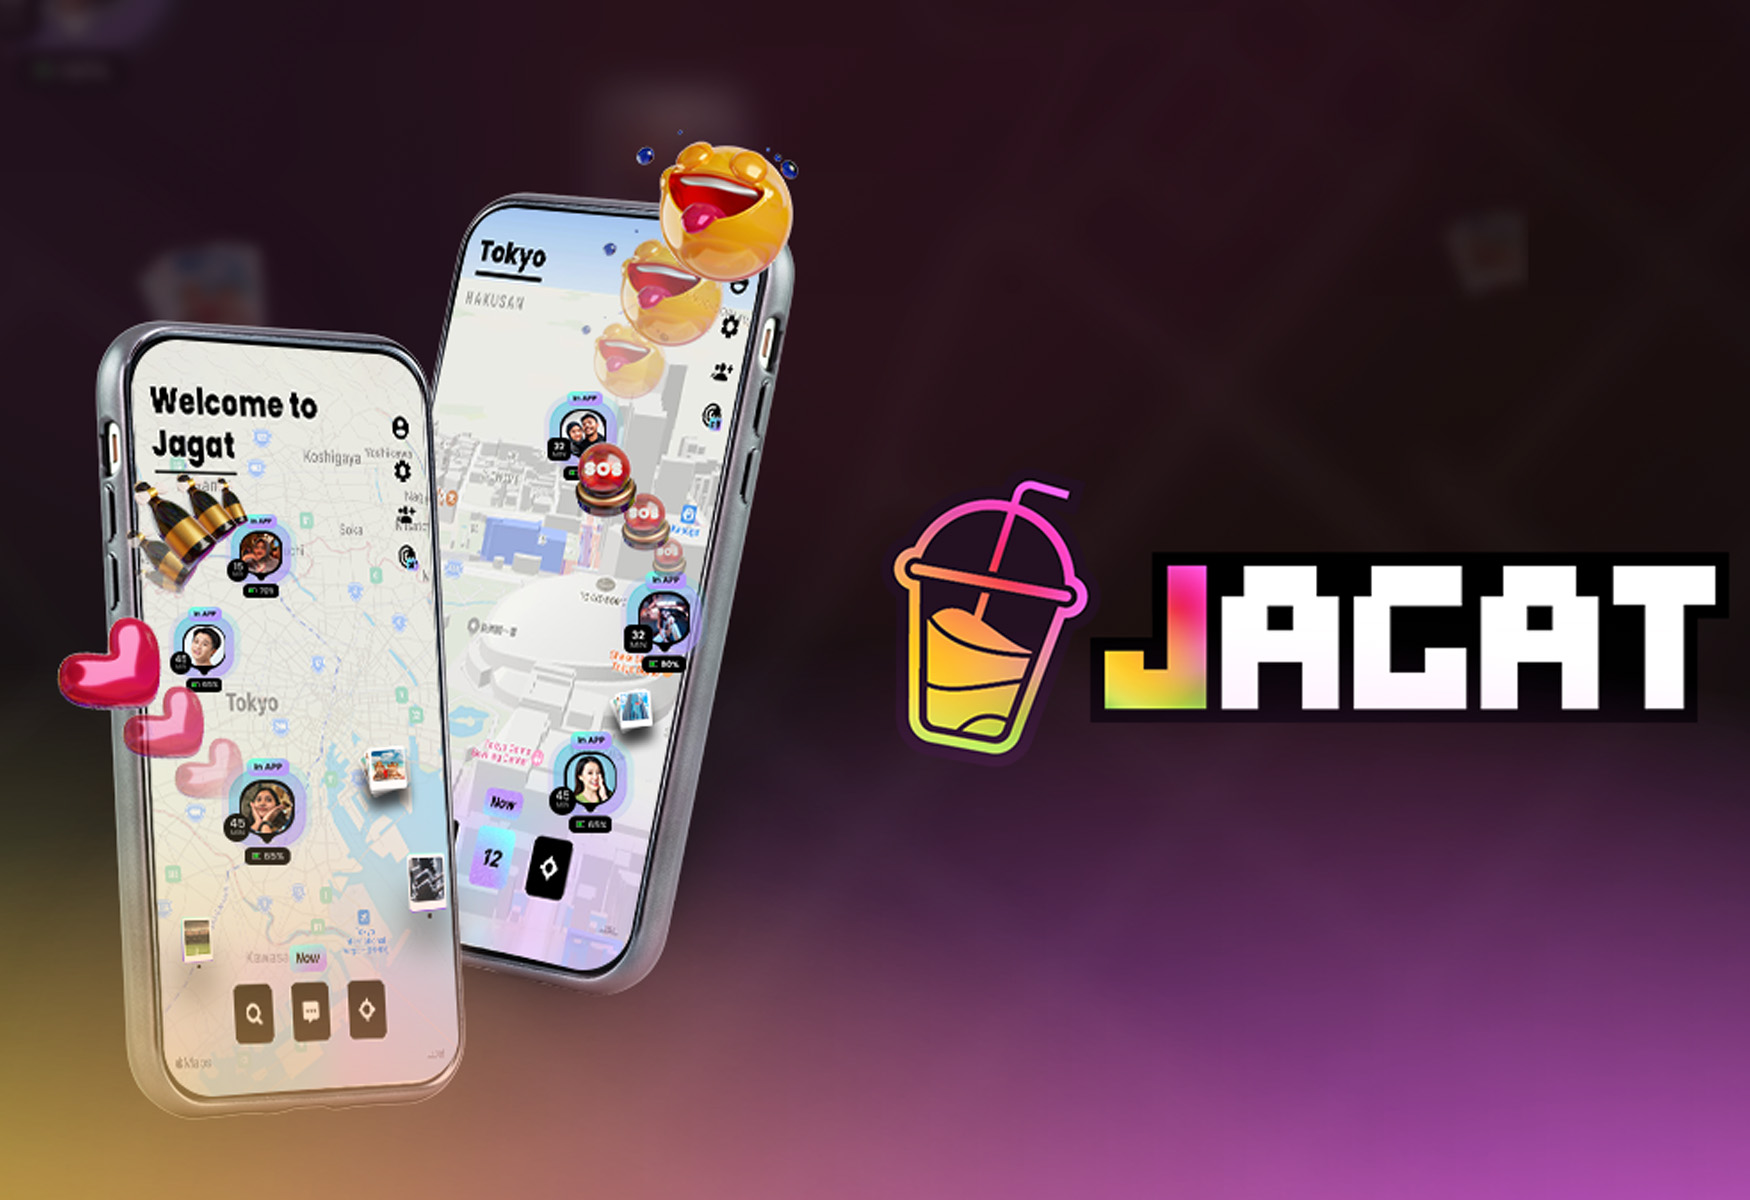 jagat-social-network-surpasses-10-million-users-focusing-on-real-life-connections